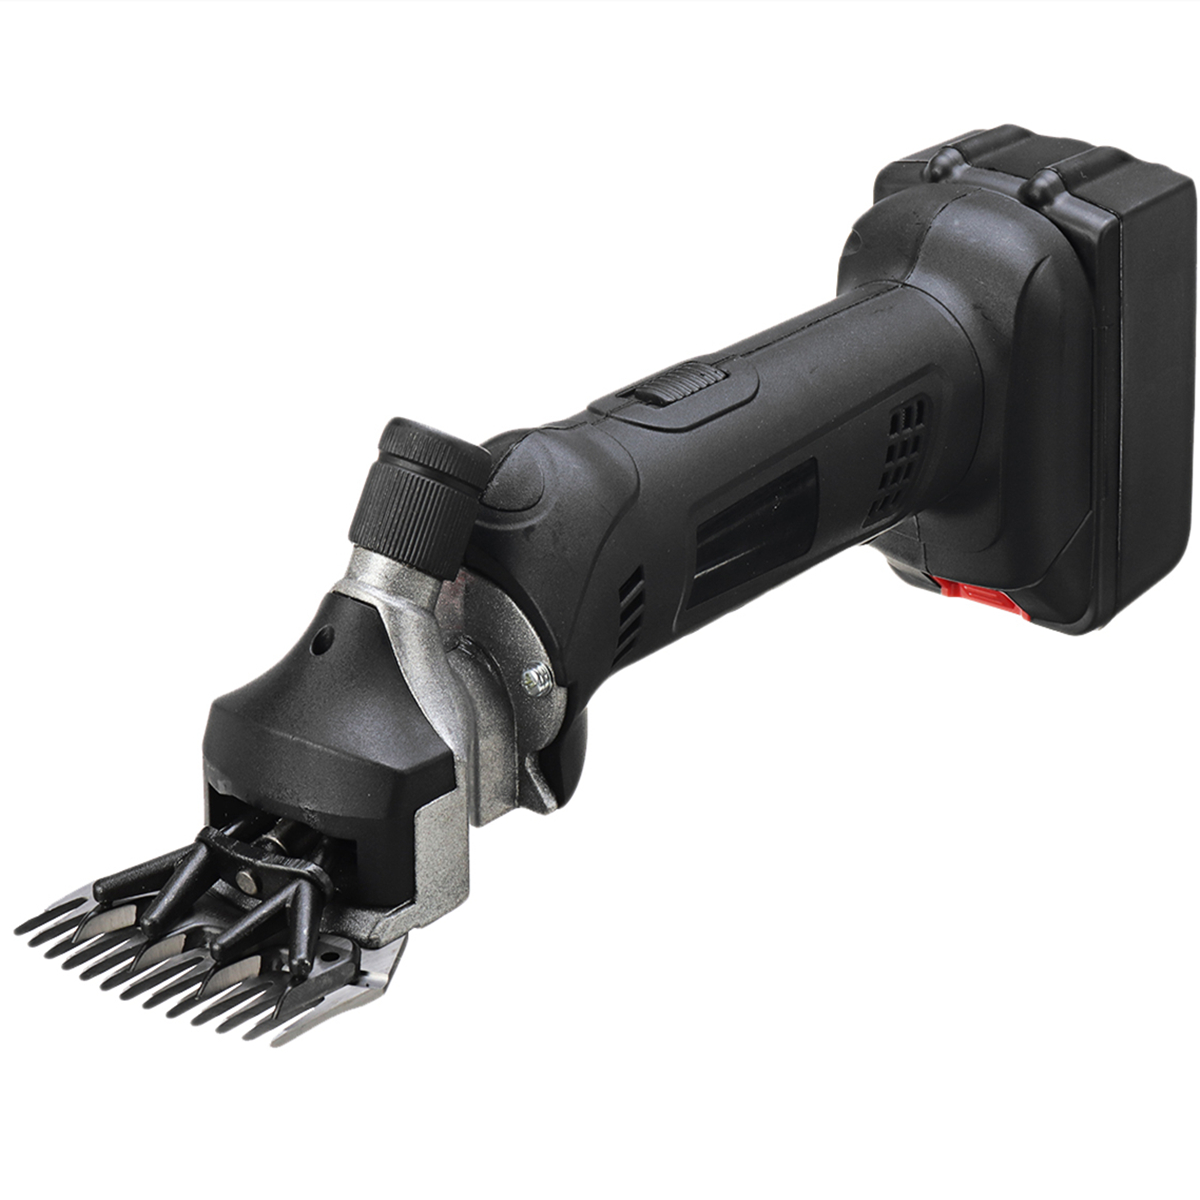 21V-Cordless-Electric-Sheep-Pet-Hair-Clipper-6-Speed-Wool-Trimmer-Shearing-Machine-W-None12-Battery--1878850-8